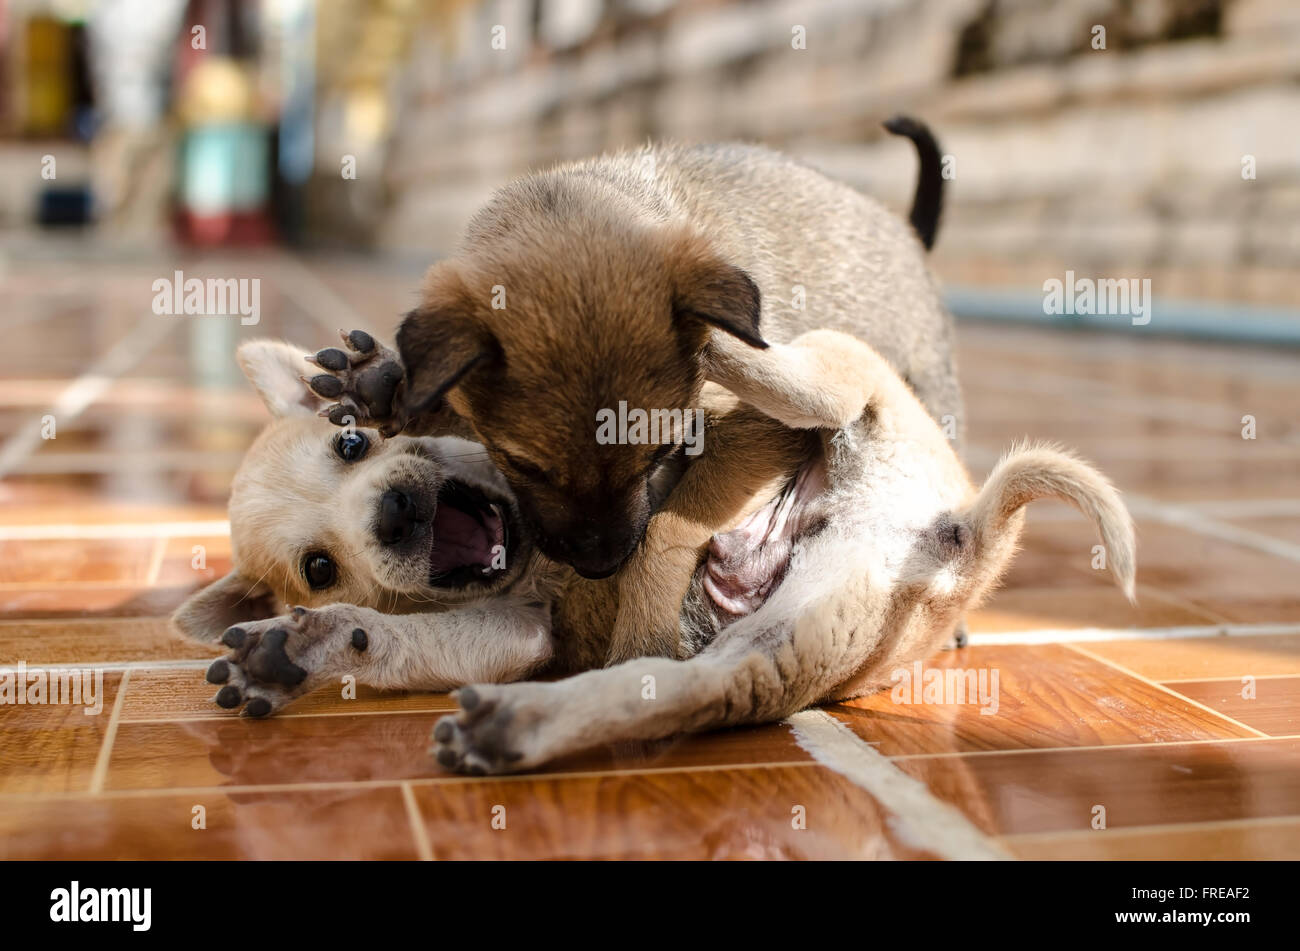 Cute puppies playing Stock Photo